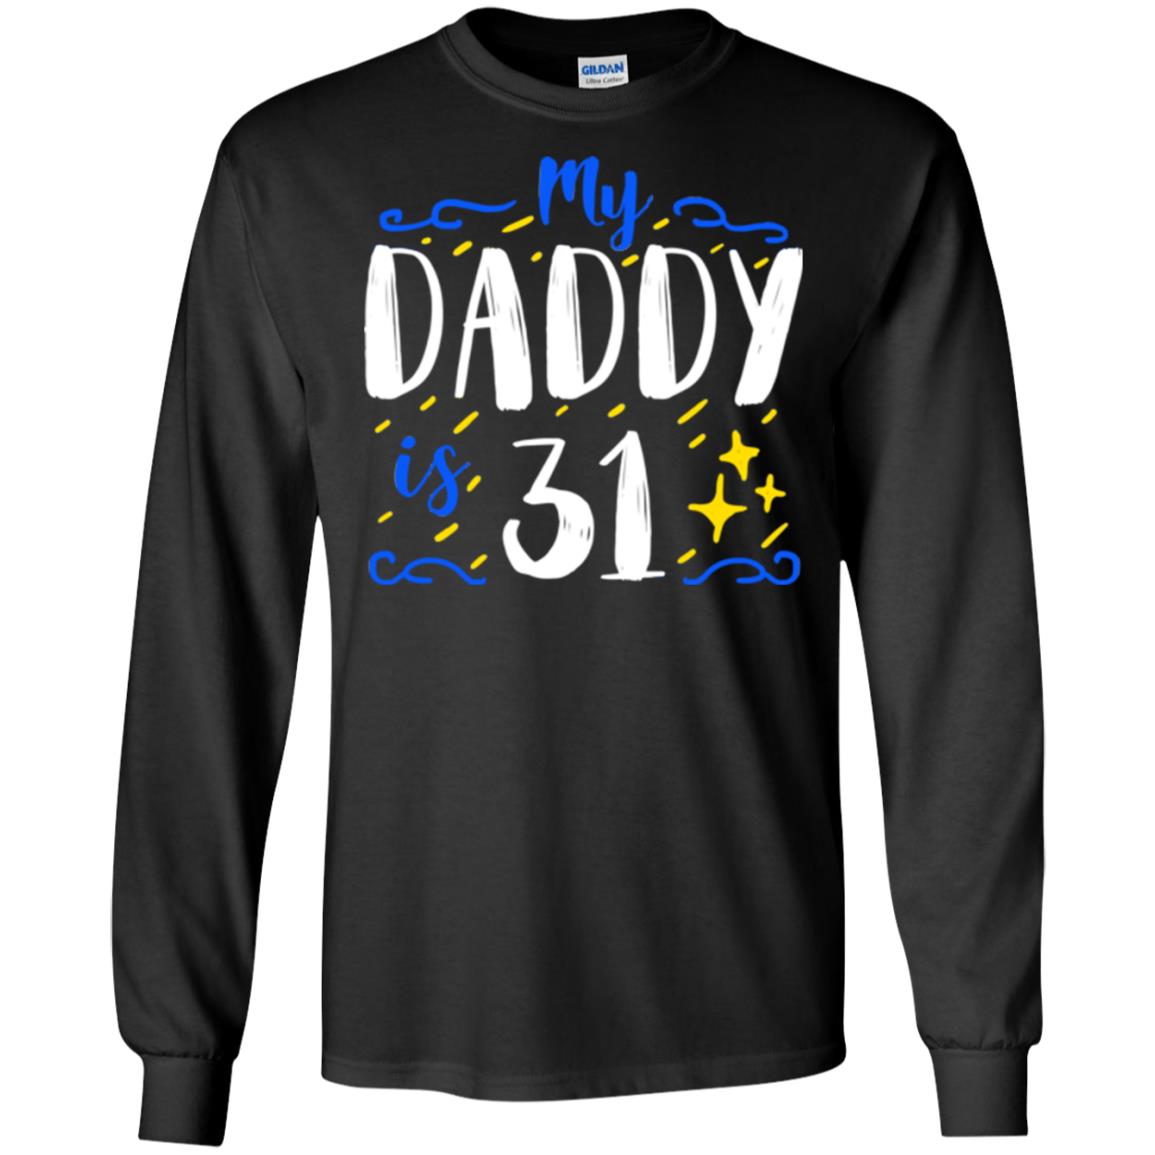 My Daddy Is 31 31th Birthday Daddy Shirt For Sons Or DaughtersG240 Gildan LS Ultra Cotton T-Shirt